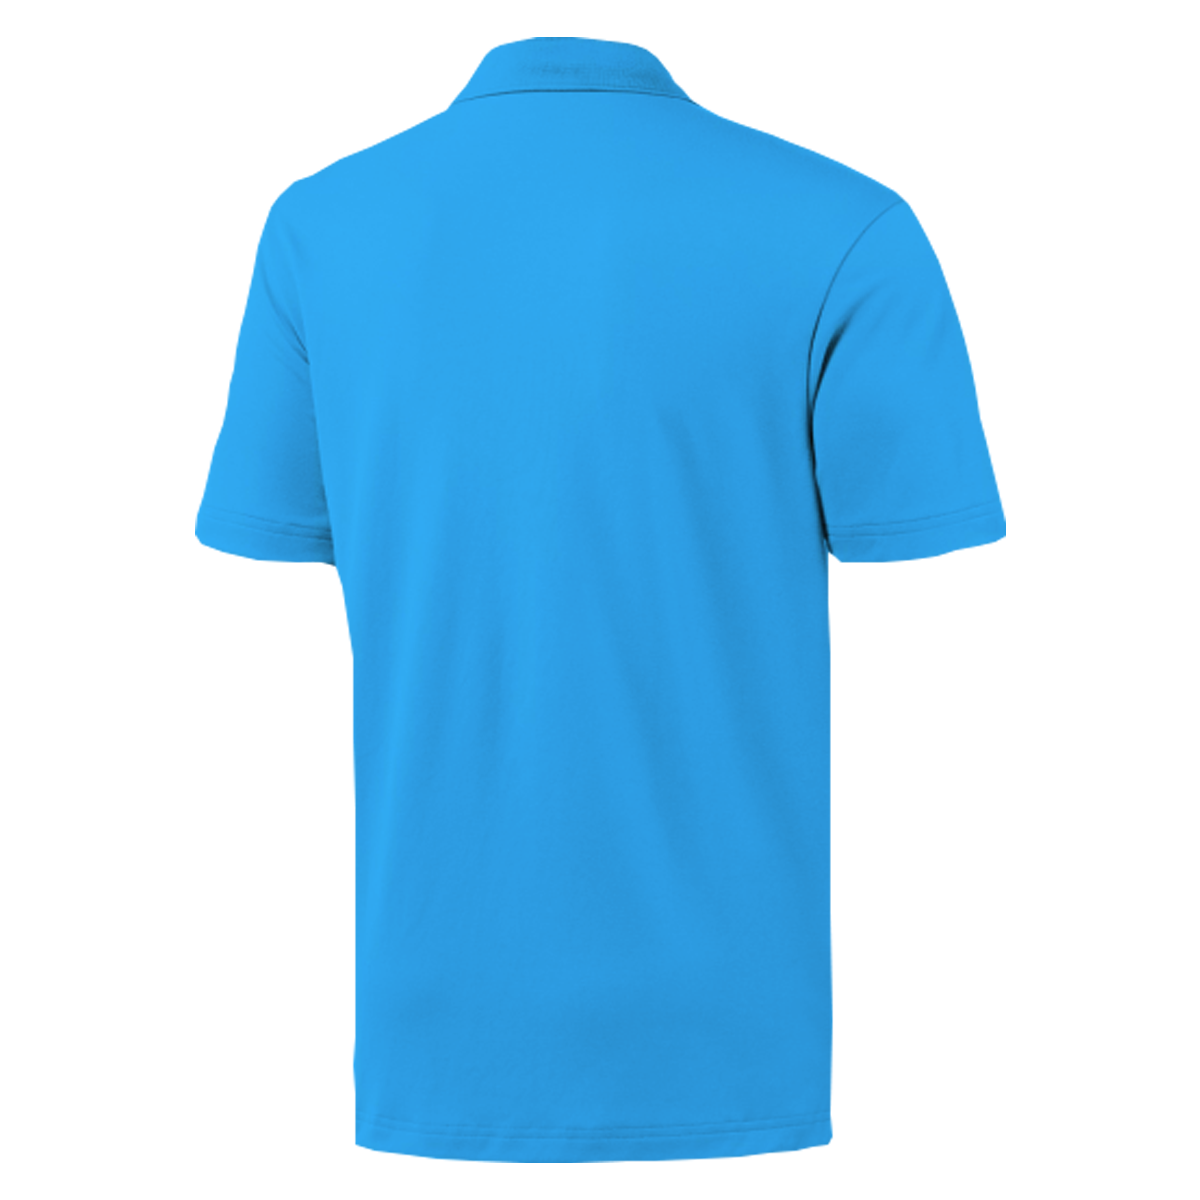 Sky Blue Polo Shirt - Unisex - Branding & Printing Solutions Company in ...